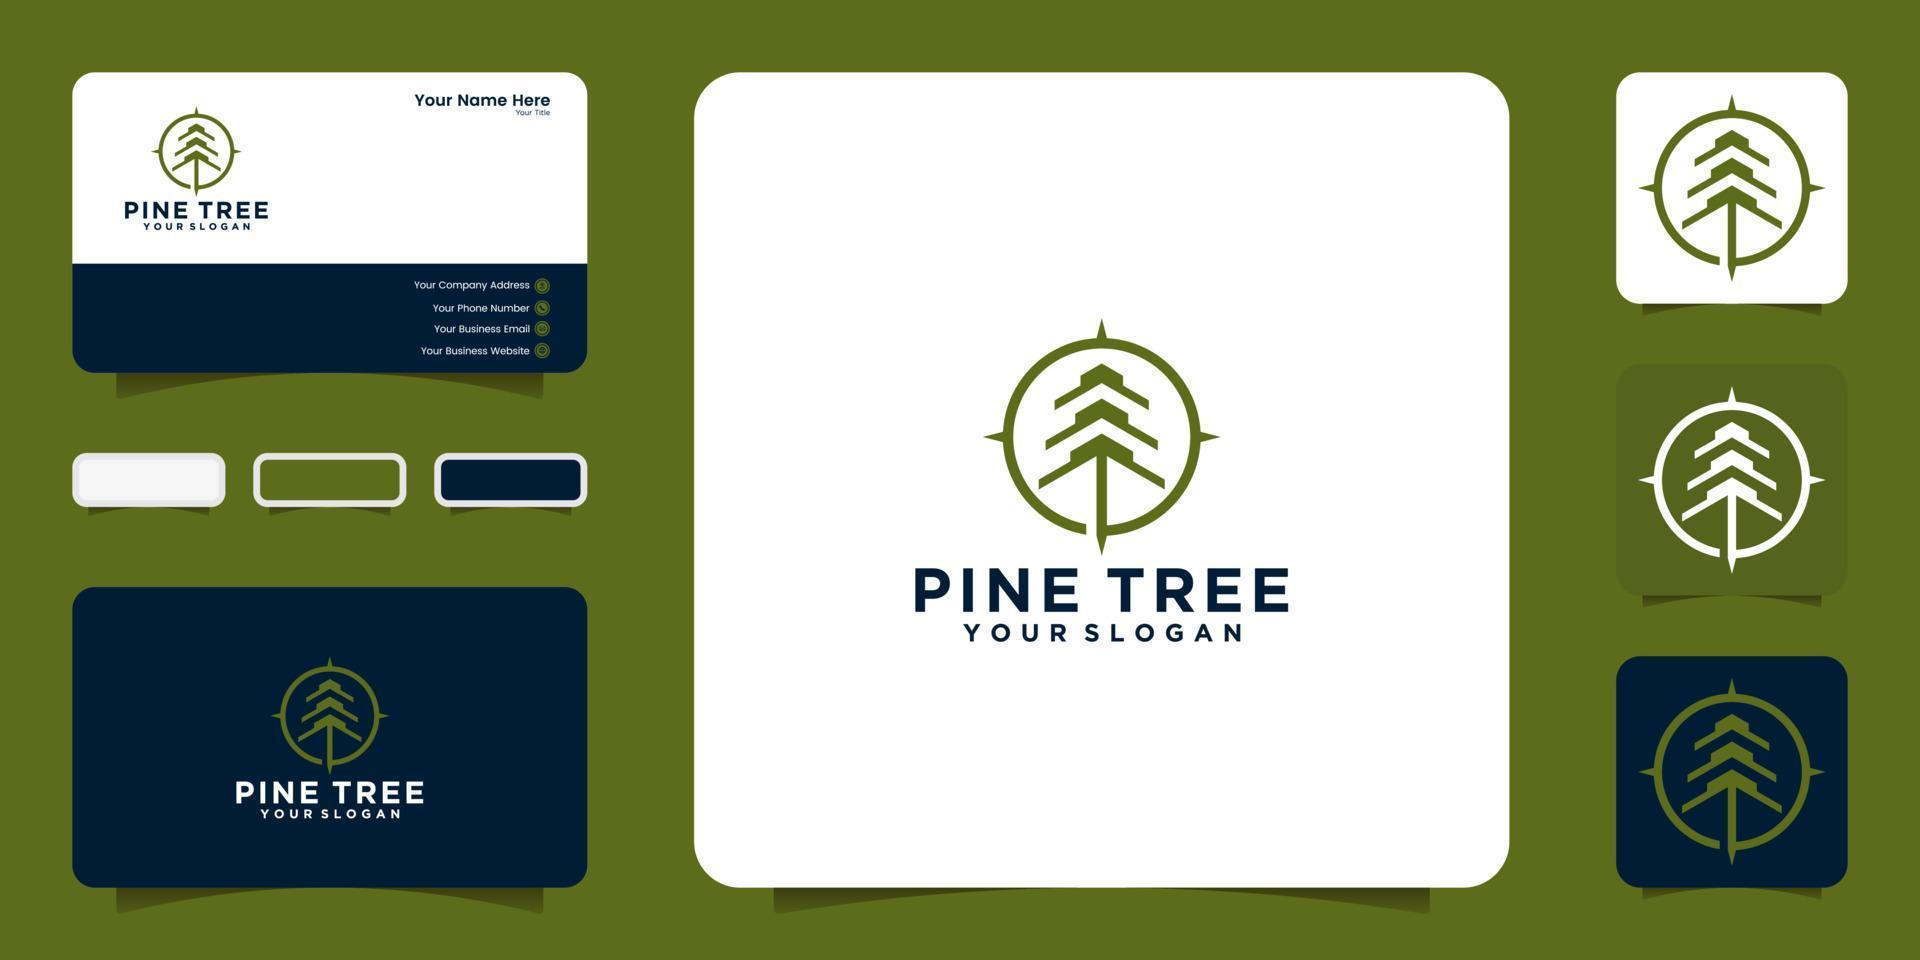 pine tree logo with arrow and compass pointer design, icon, symbol and business card inspiration vector